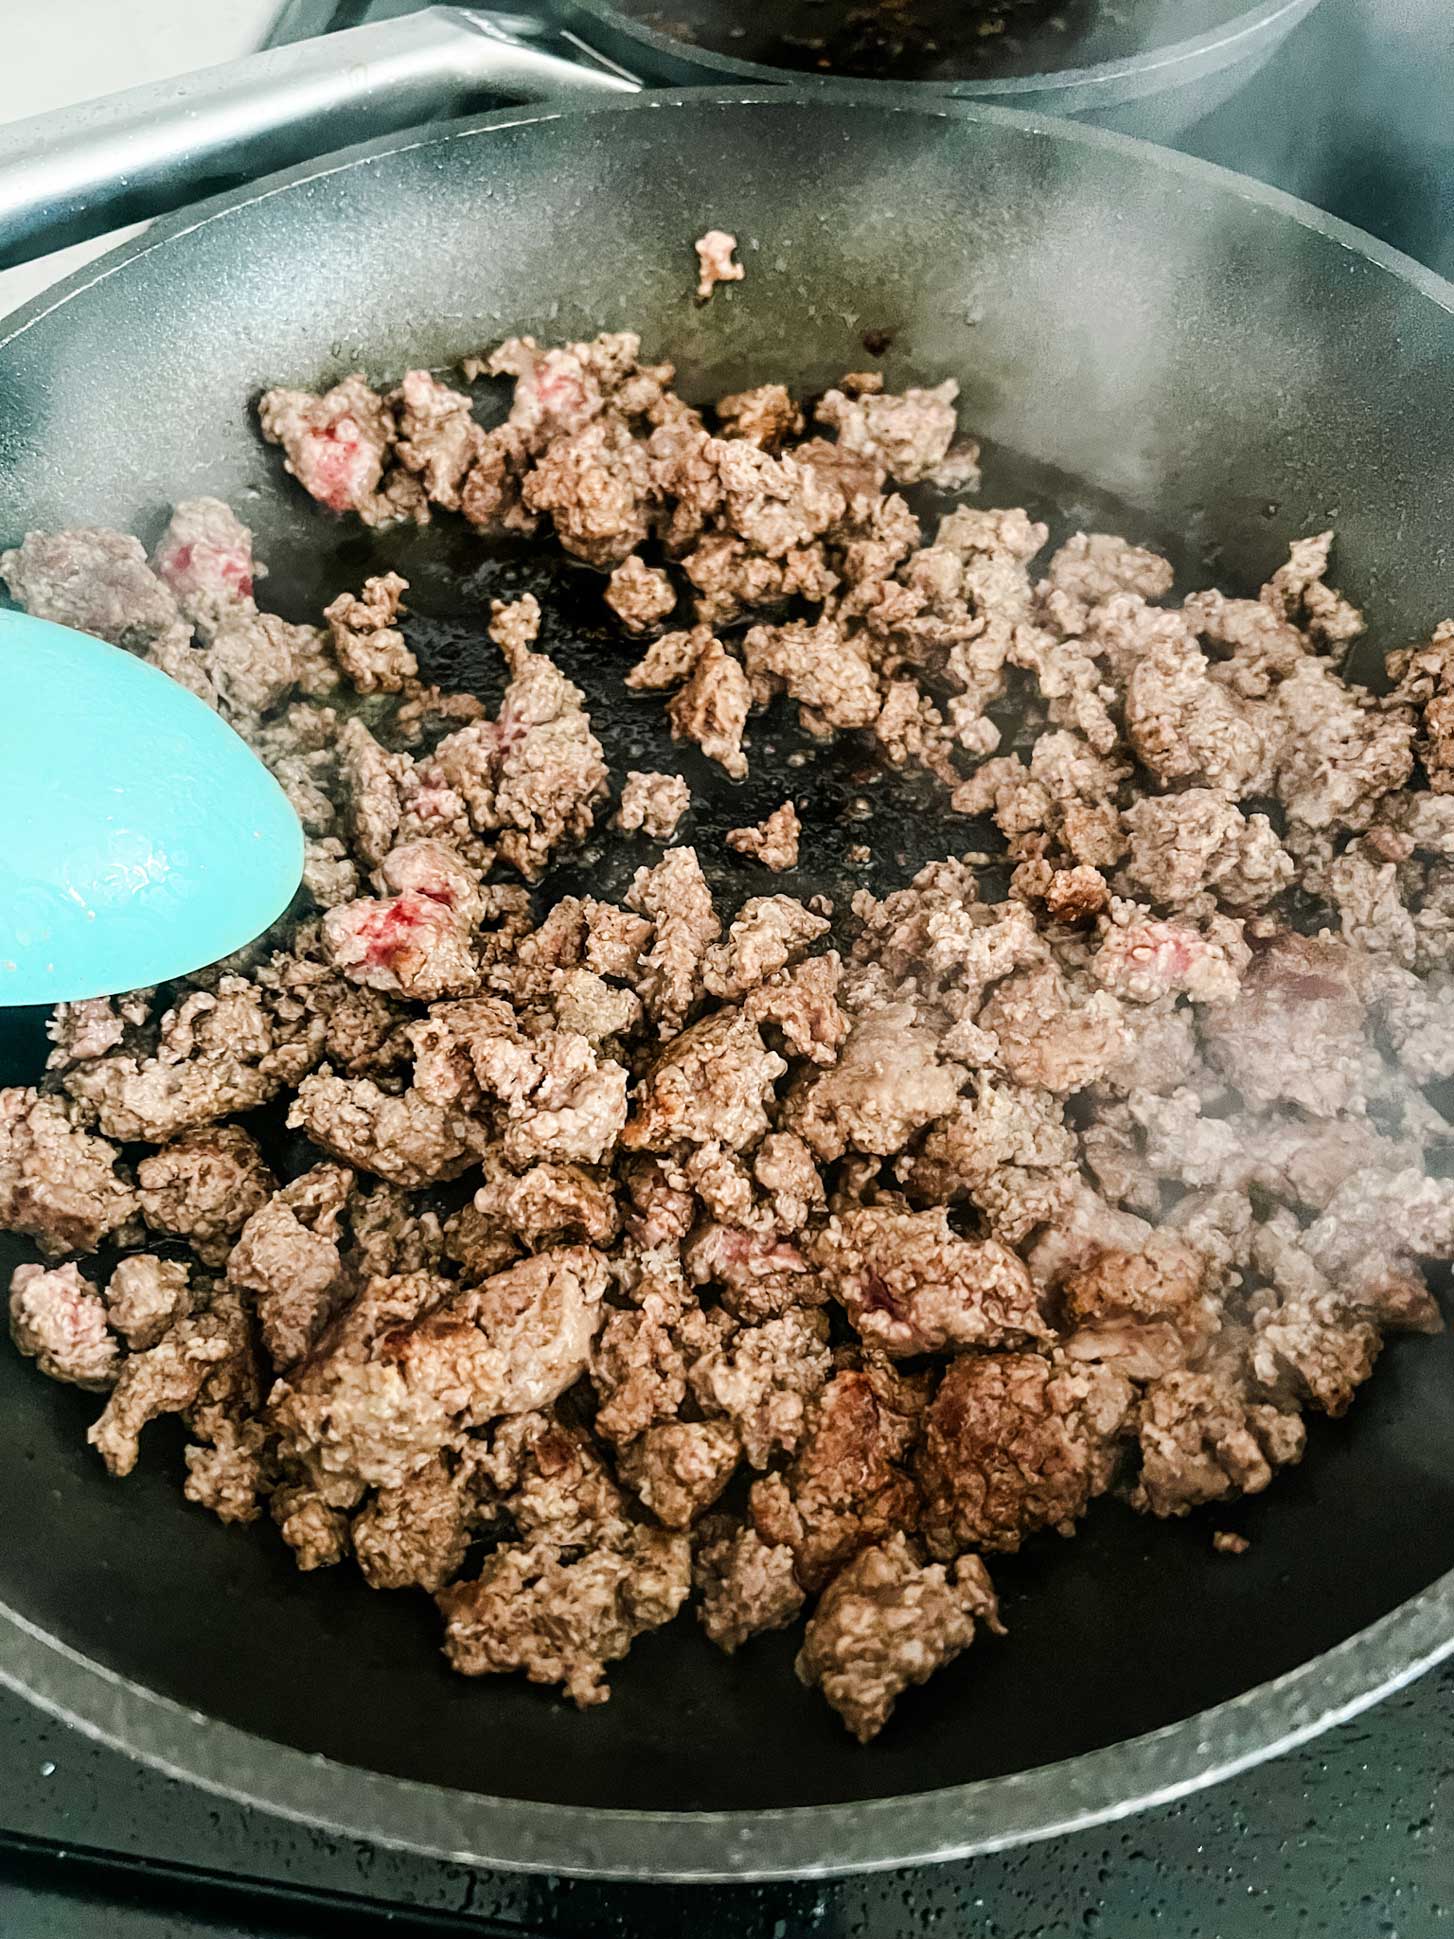 Ground beef cooking in a skillet.